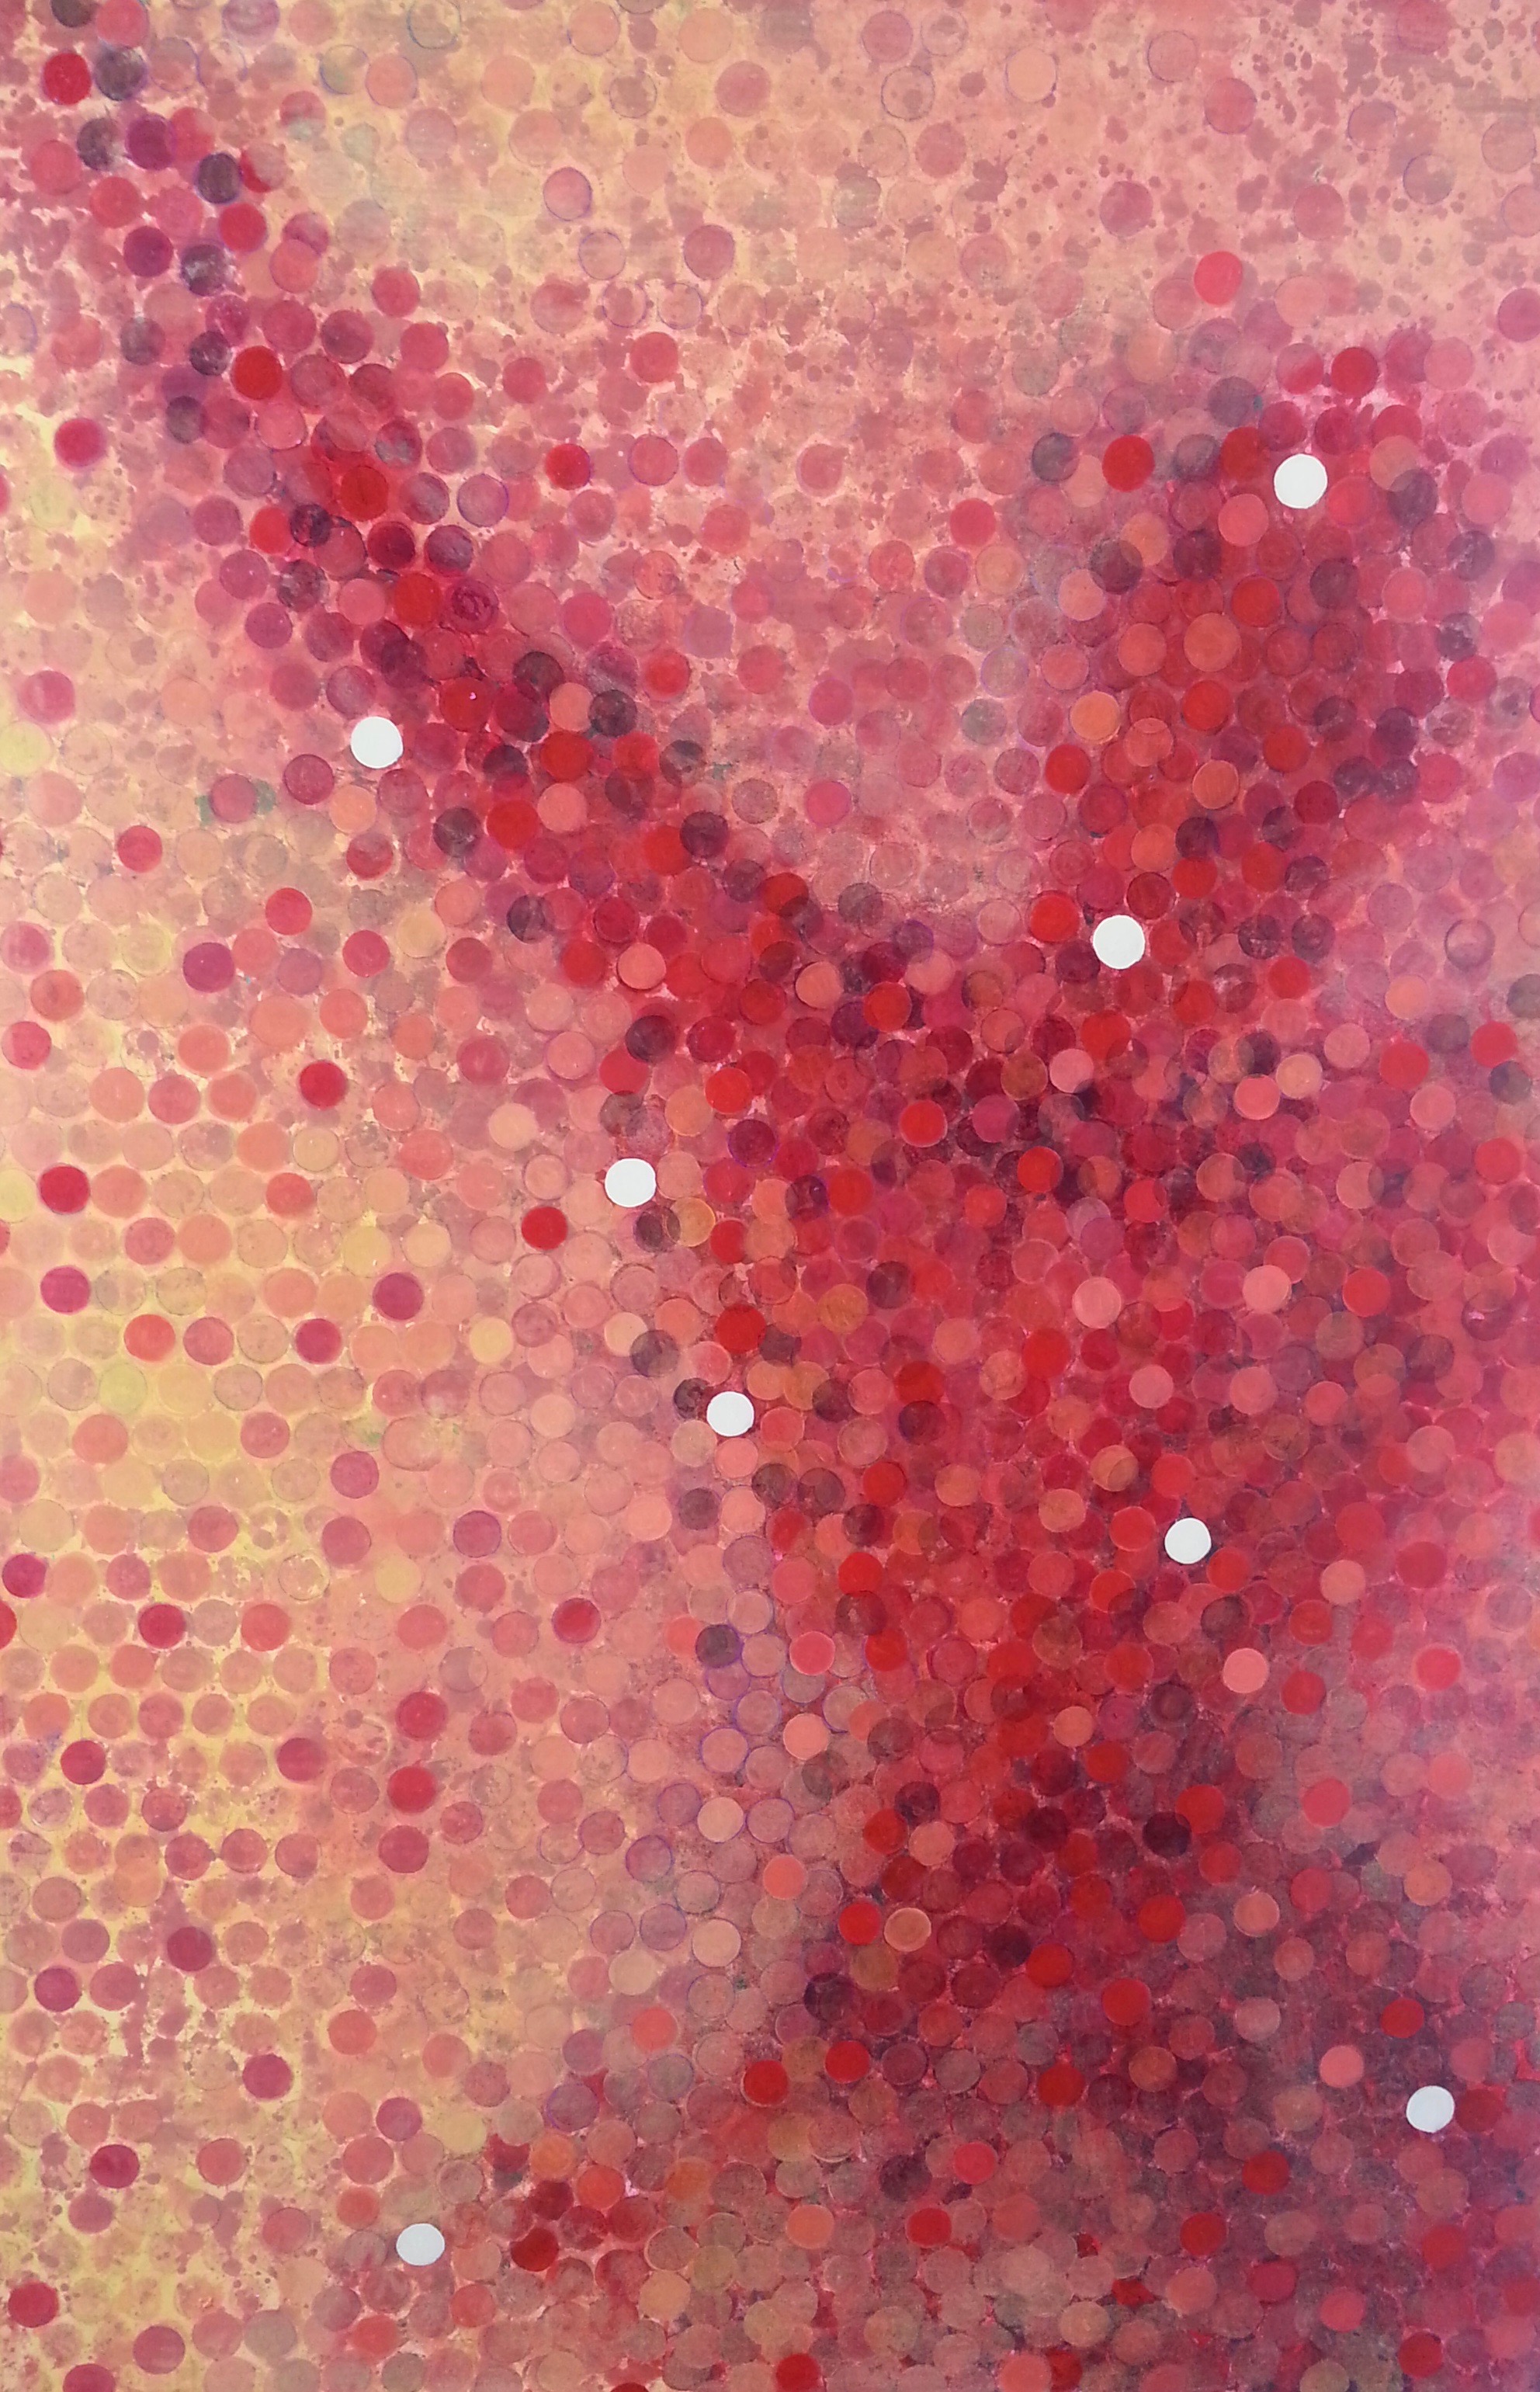  Movement in Red, 2012 60 x 40 inches Acrylic on canvas 